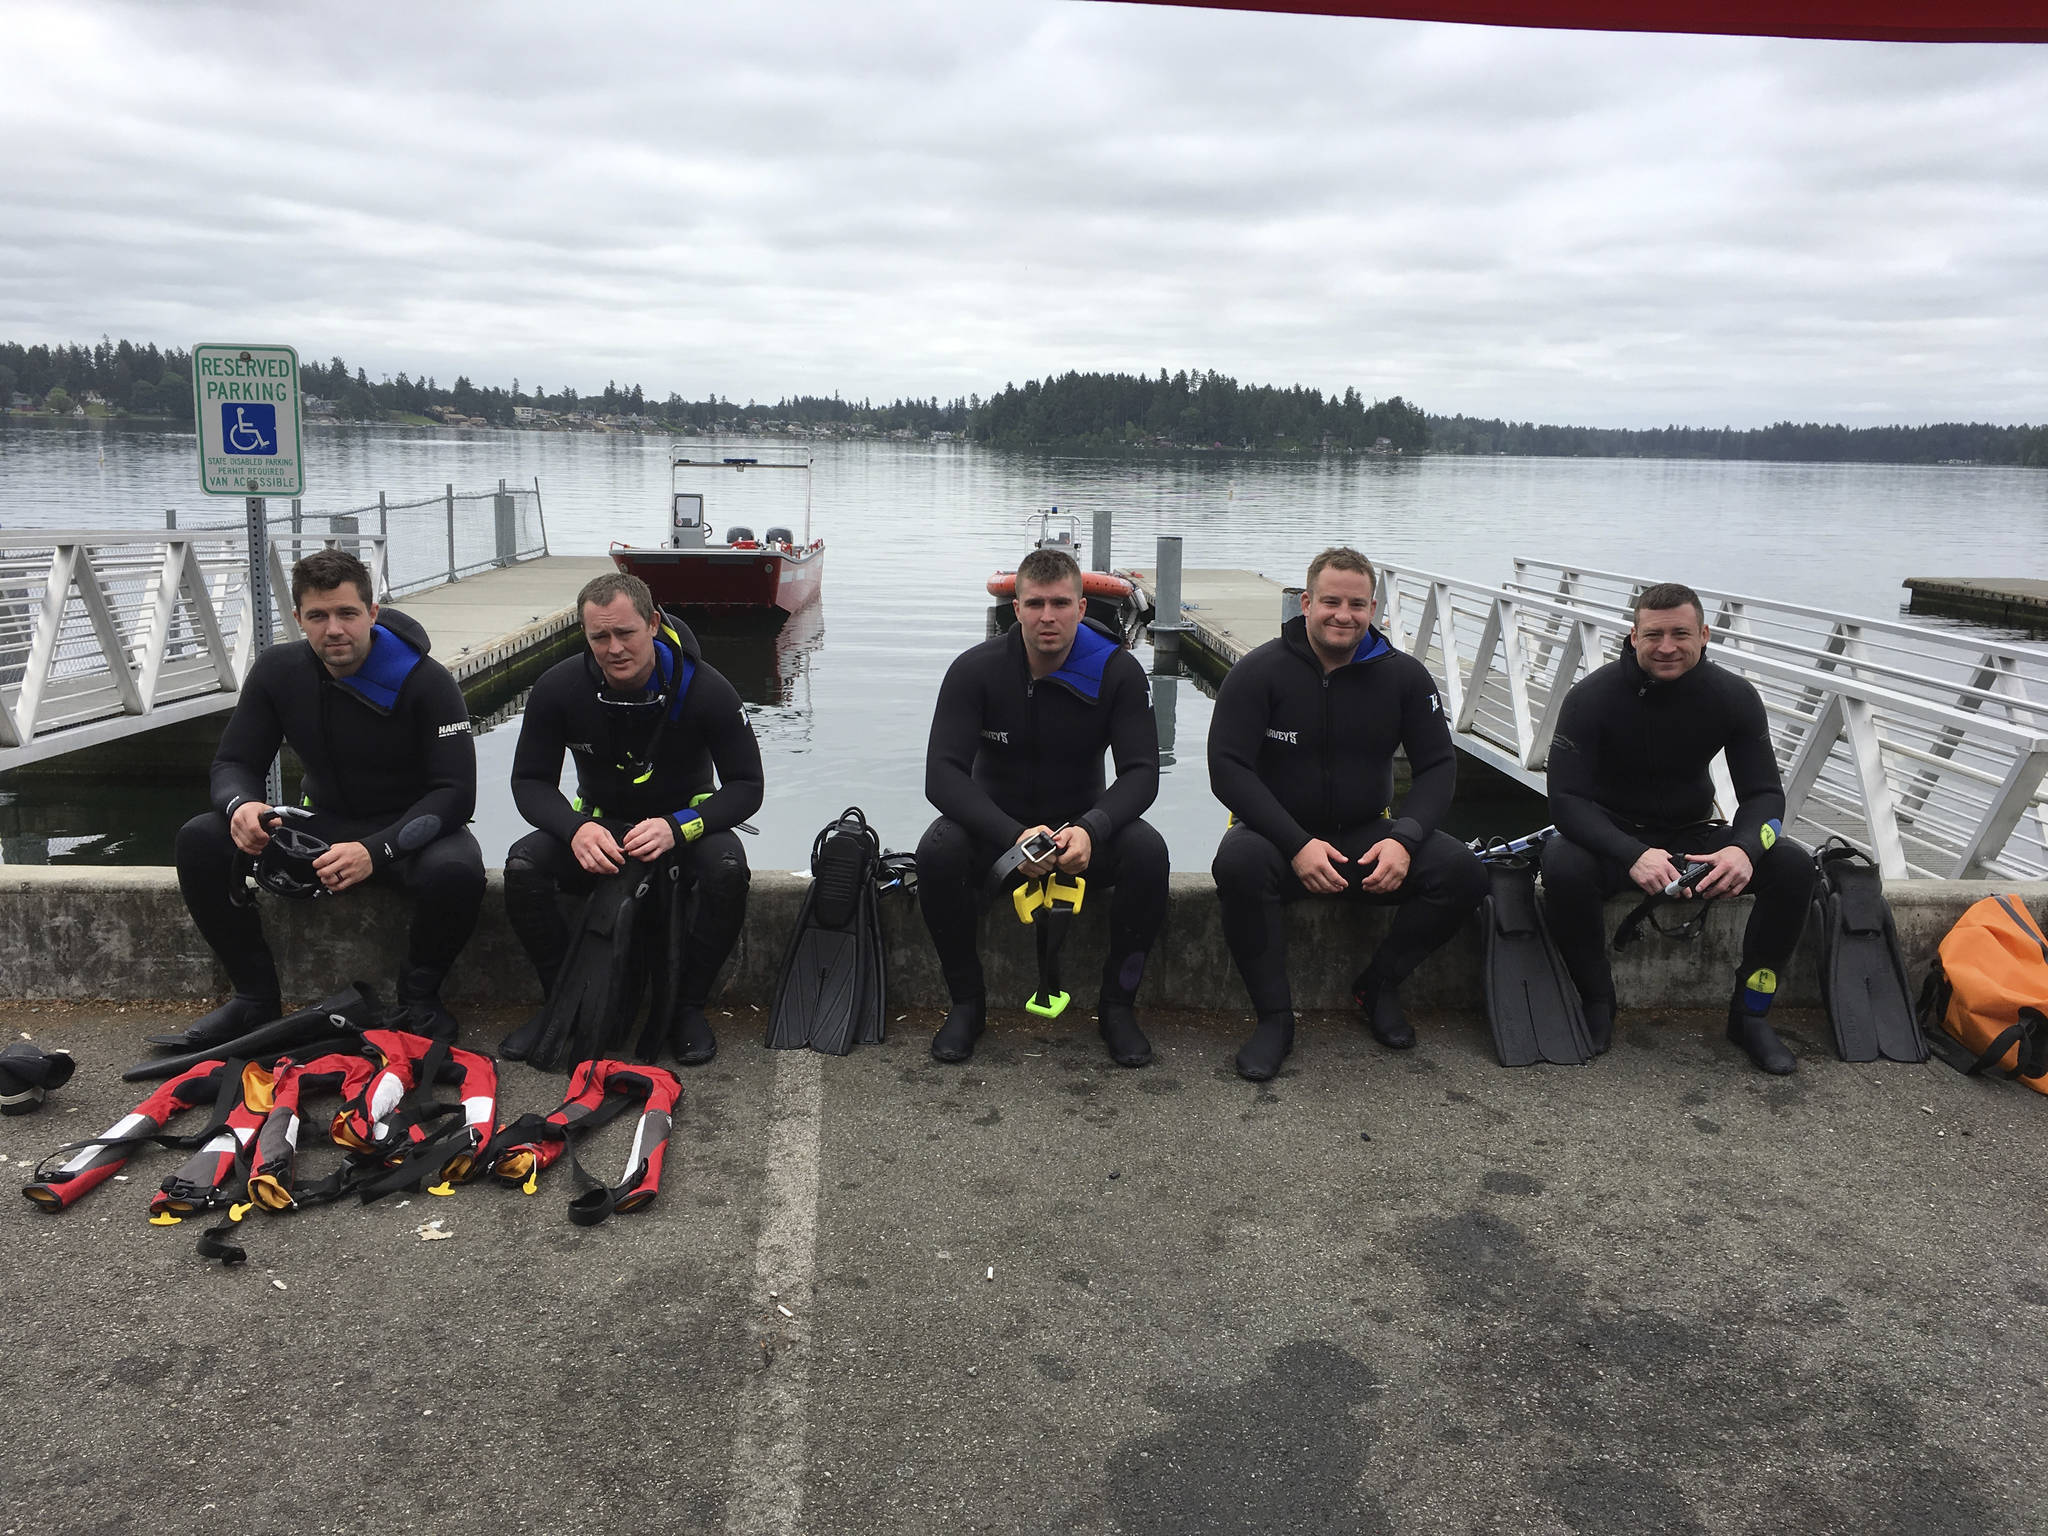 Arlington firefighters behind the department’s new Technical Level Rescue Swimmers team take a break from training at American Lake in Pierce County. Pictured from left, Chris Peterson, Andrew Shannon, Sam Johnston, team leader and Capt. Kirk Normand, and Thomas Jackson.